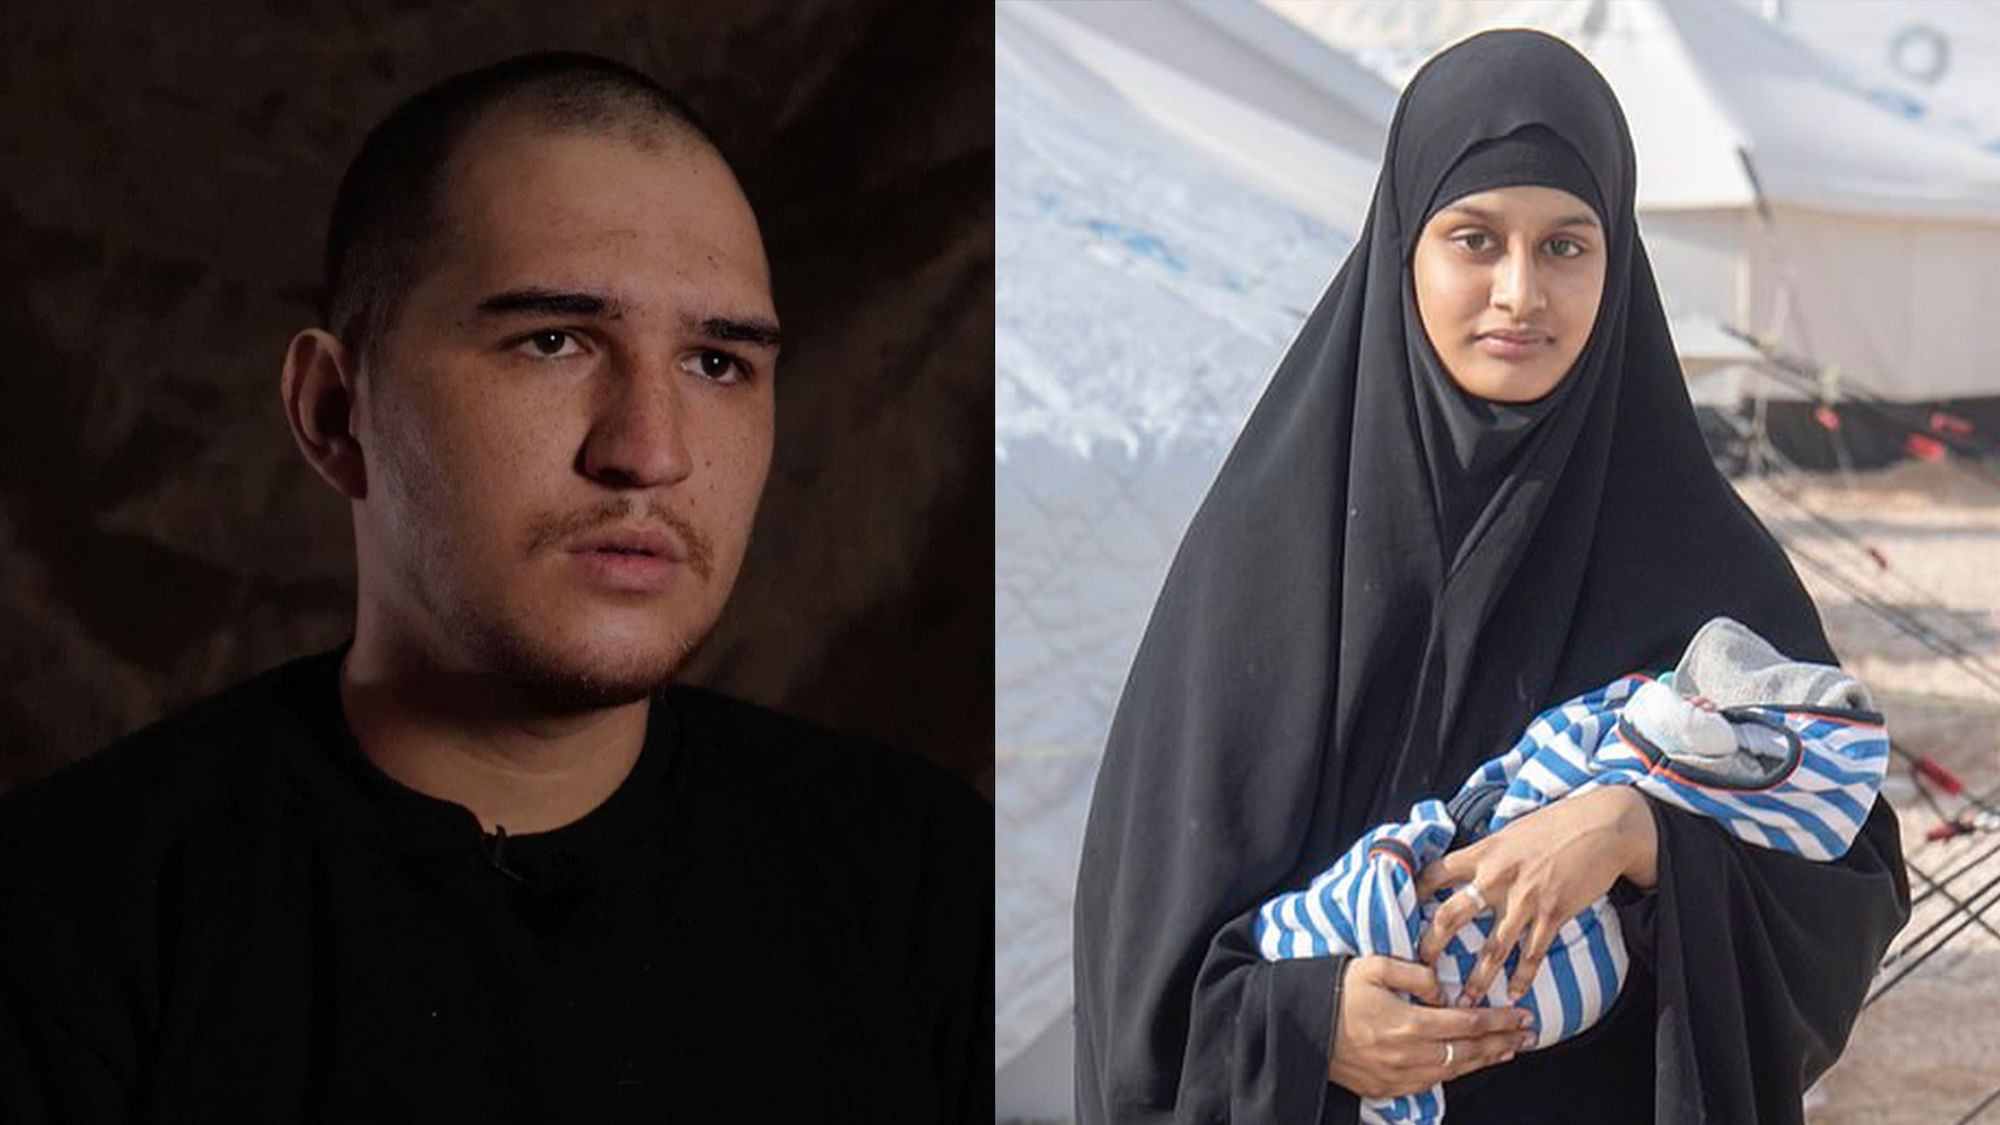 Former ISIS member Yago Riedijik and his wife Shamima Begum who fled UK to join ISIS.